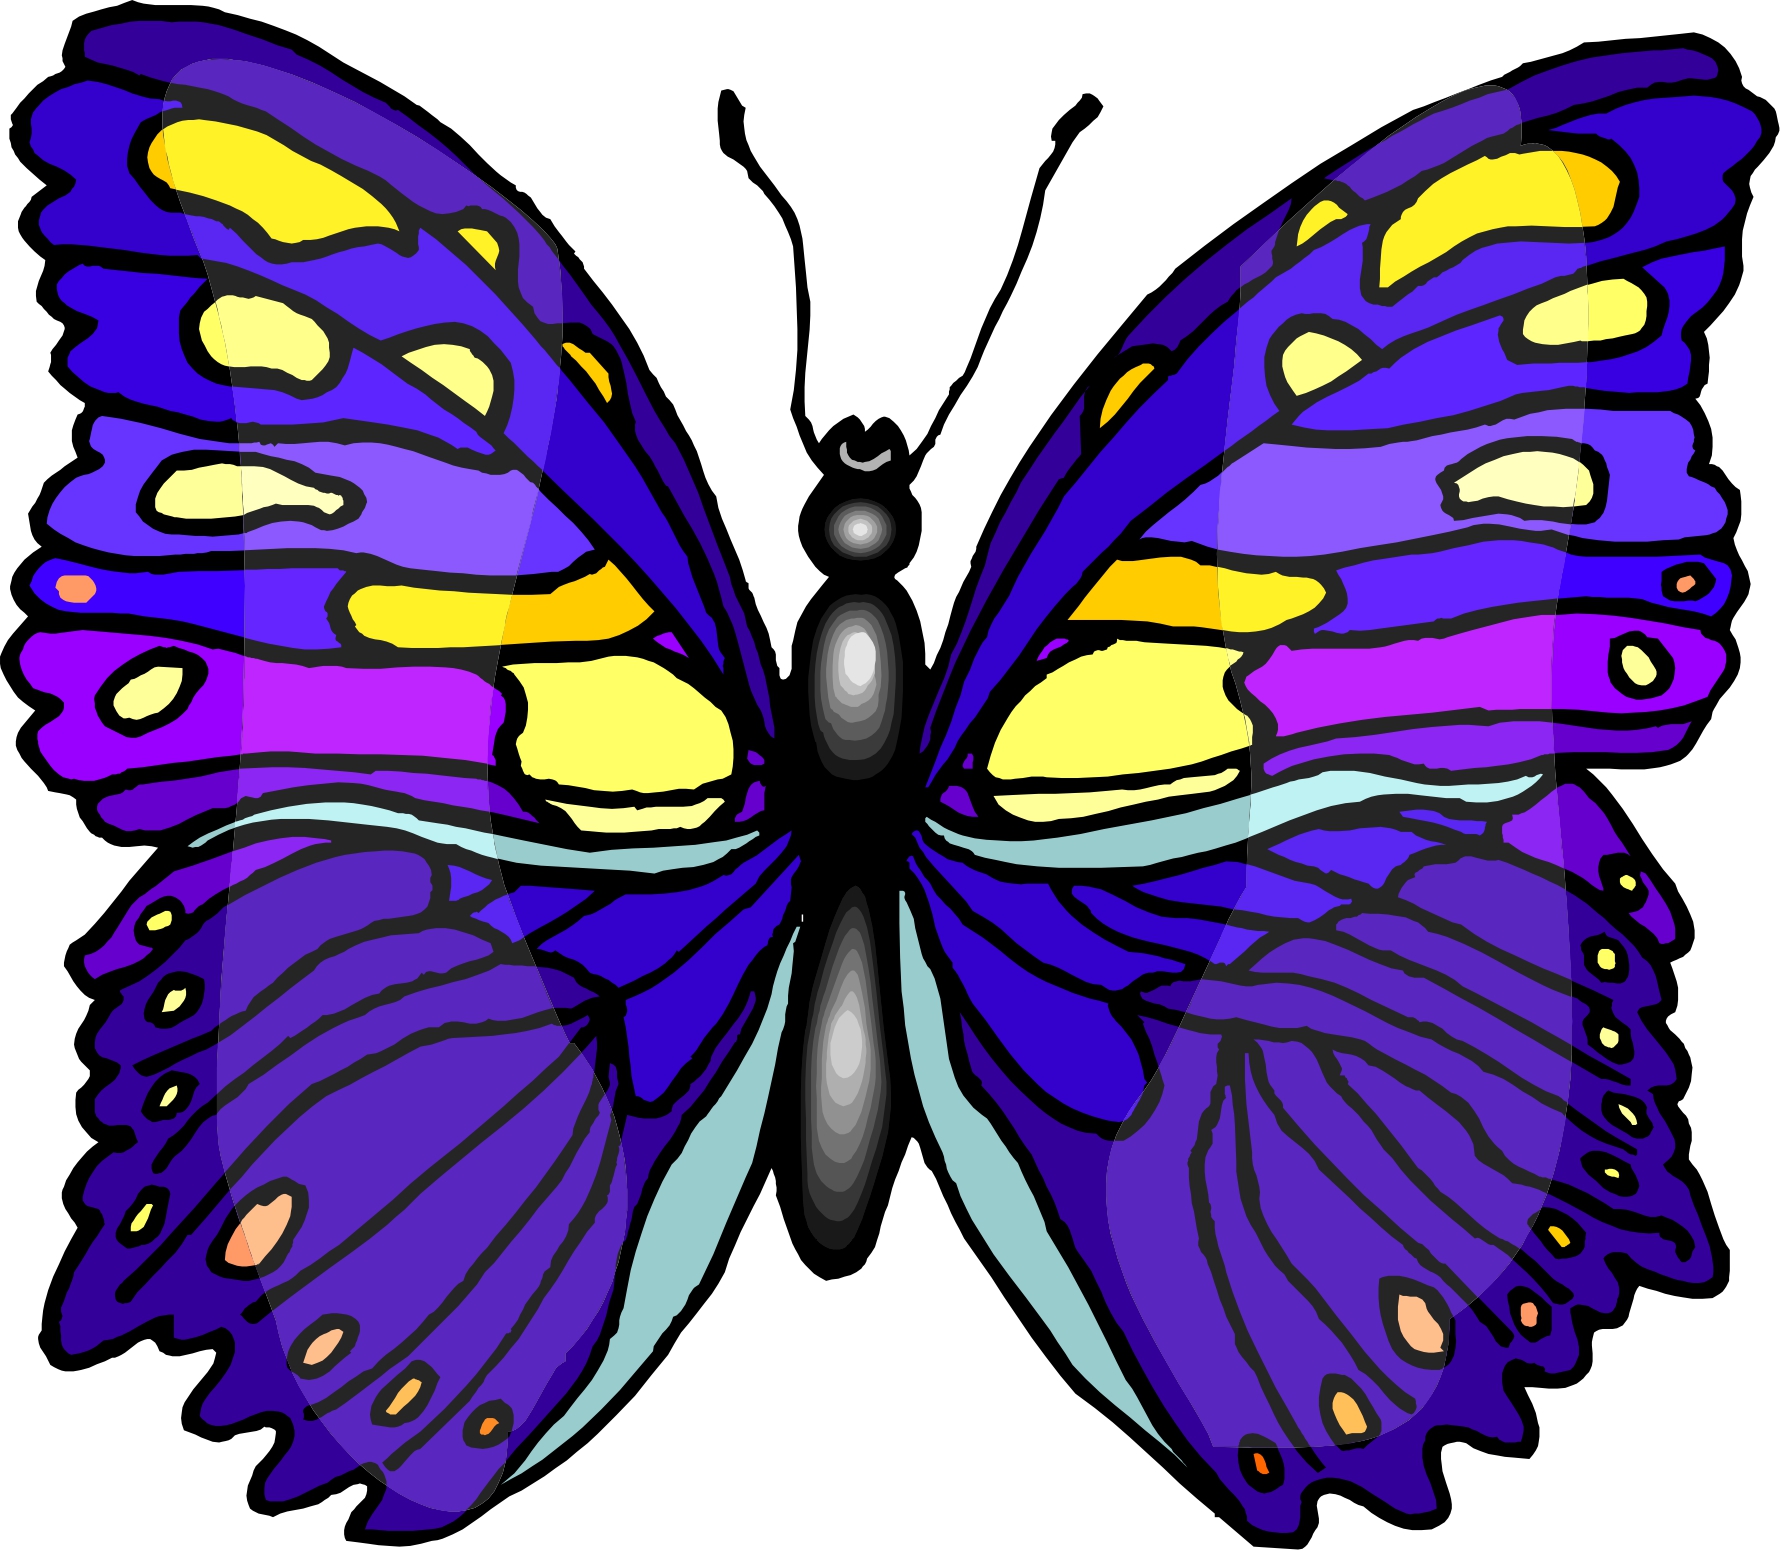 Free Cartoon Butterfly Images, Download Free Clip Art ...